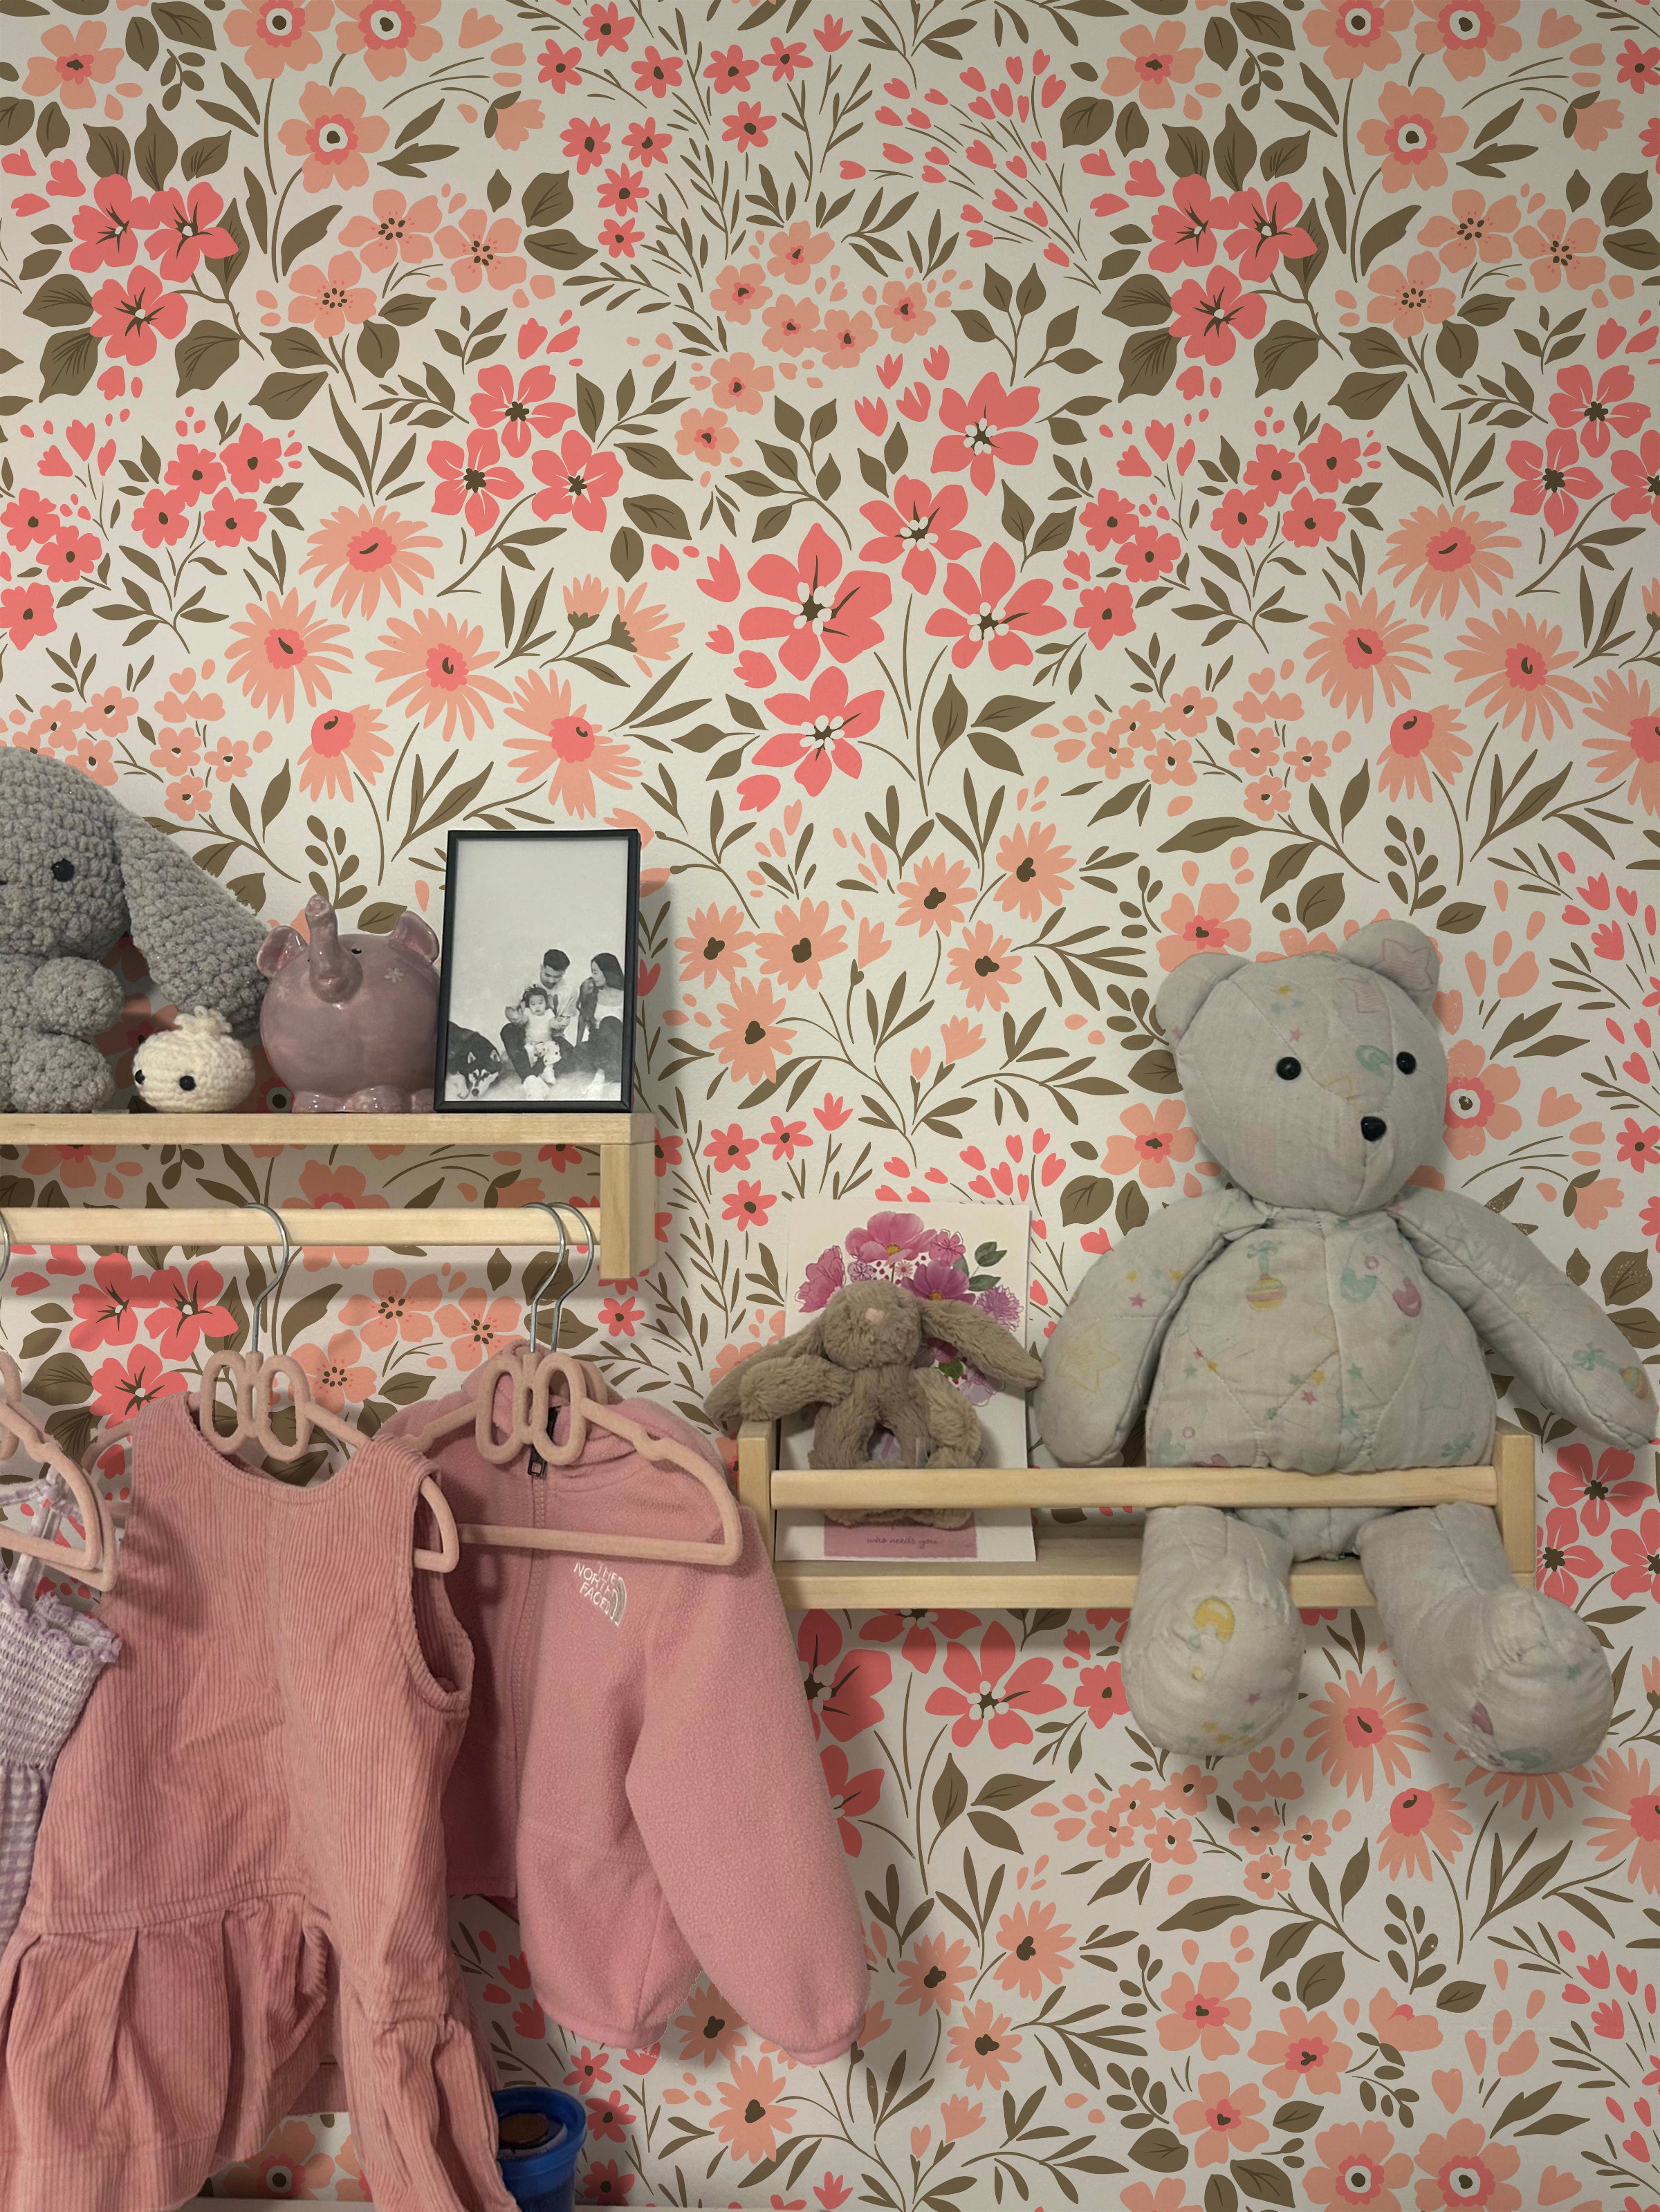 A cozy corner of a child's room with a shelf displaying various plush toys, a framed photo, and children's clothing hanging below. The wall is covered in Floral Frenzy Wallpaper, featuring a dense pattern of pink and peach flowers with green and brown foliage.